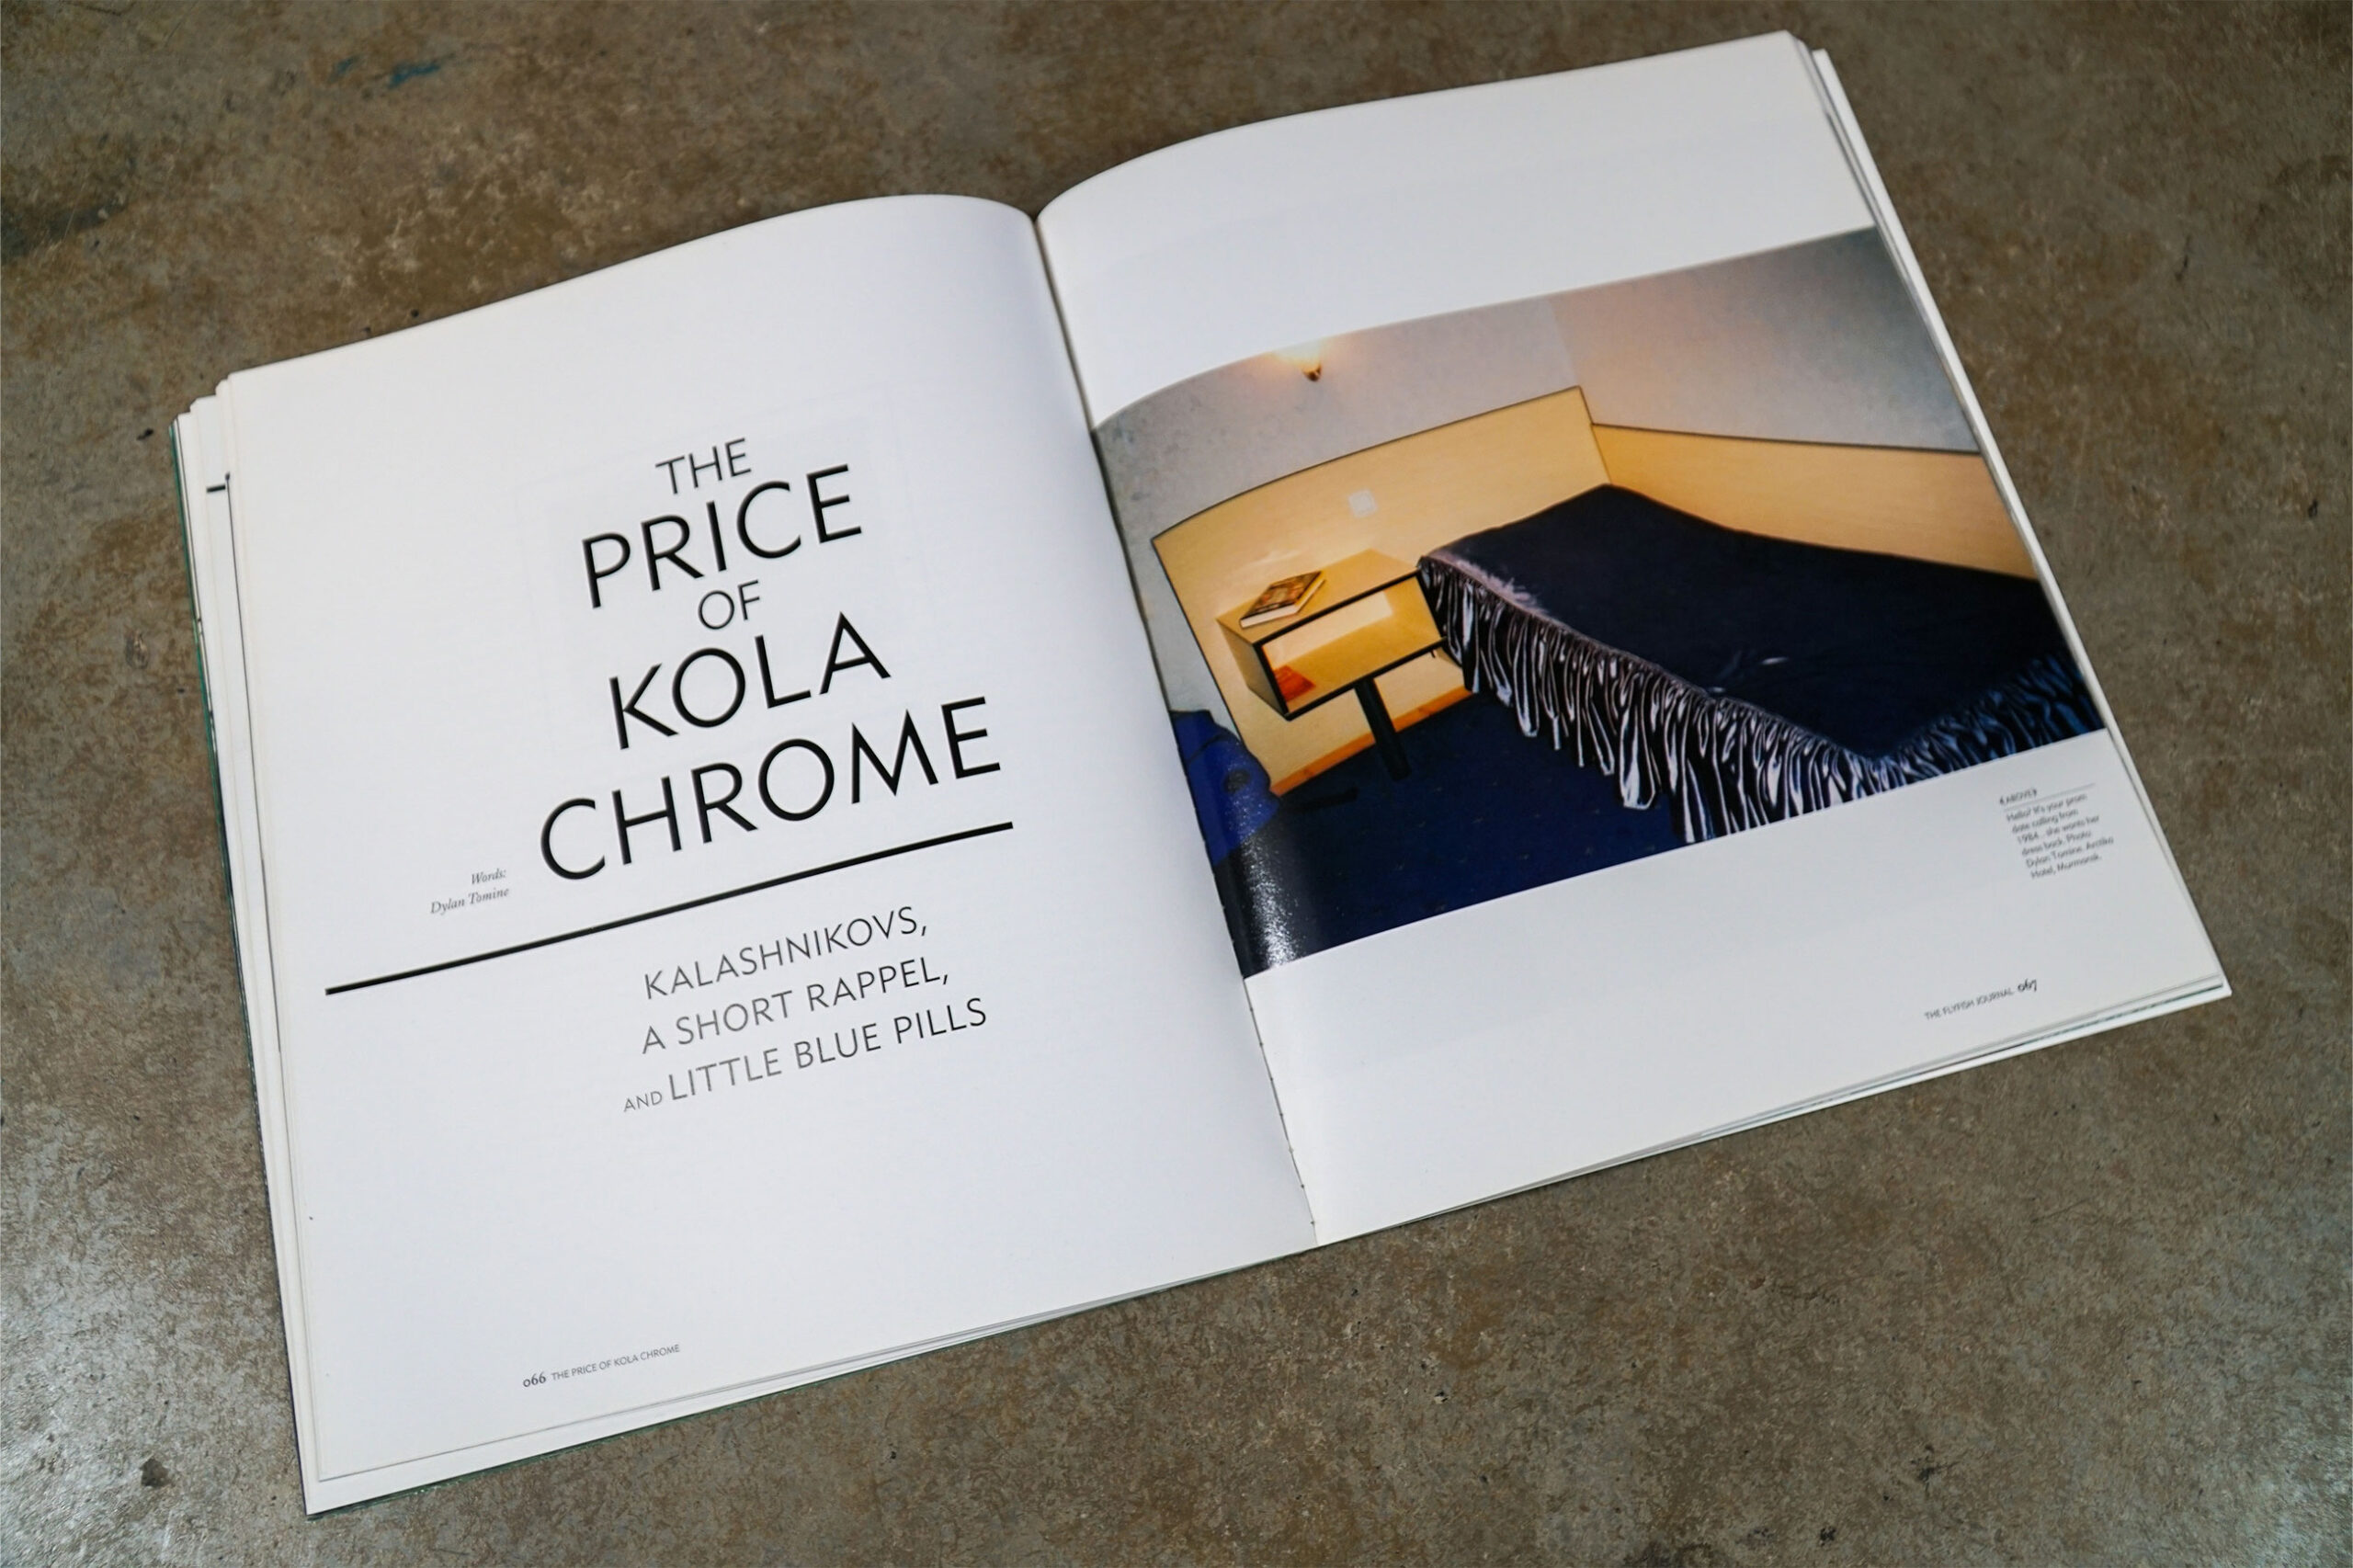 The Flyfish Journal Volume 1 Issue 1 Feature The Price of Kola Chrome